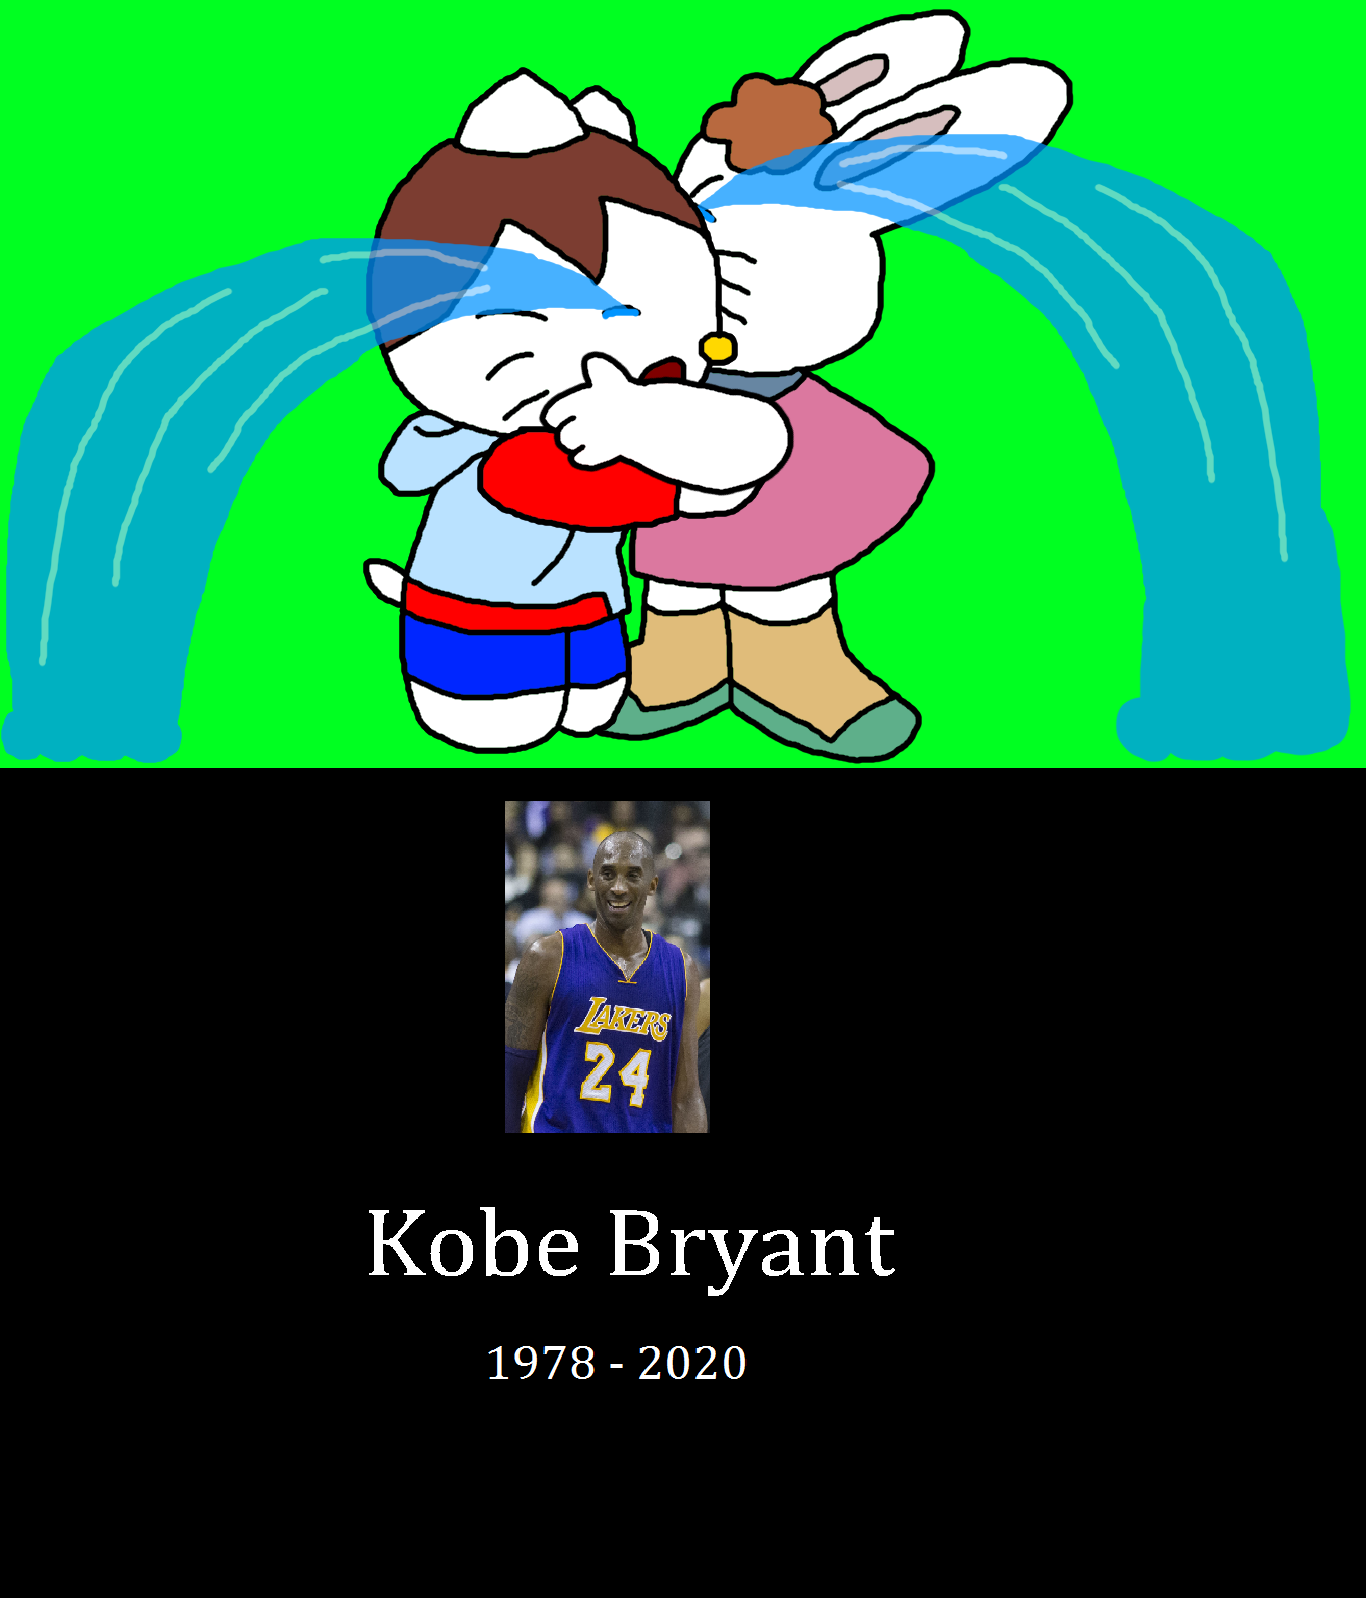 Ian And Mimi Crying Because Kobe Bryant Died By Pingguolover On Deviantart